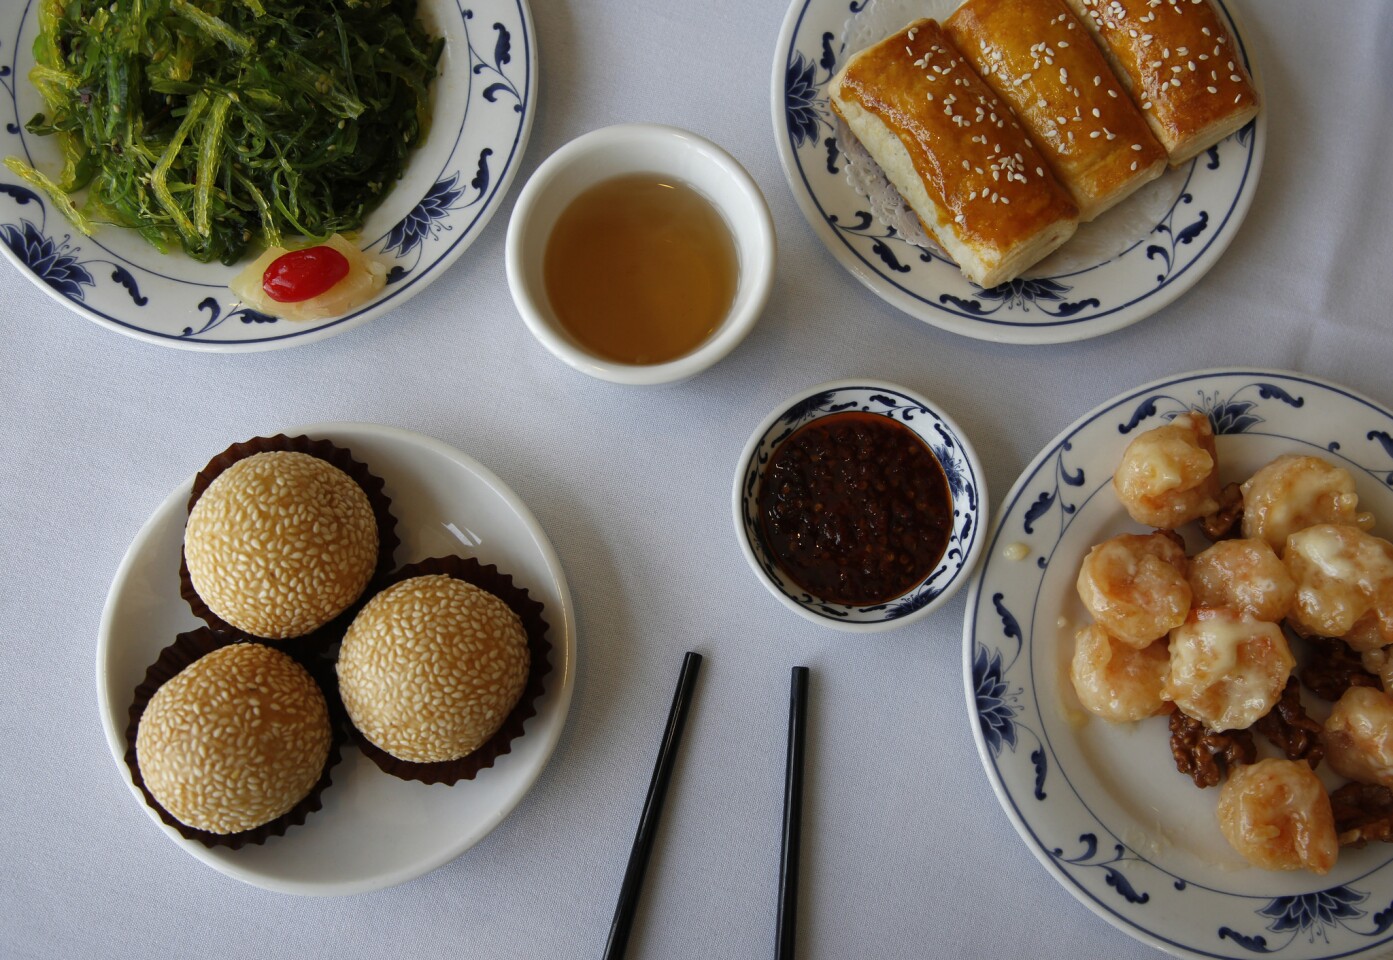 Clockwise, from top left: Seaweed salad, honey barbecue pork crispy pie, sauteed shrimp with honey walnut and sesame balls filled with red bean.